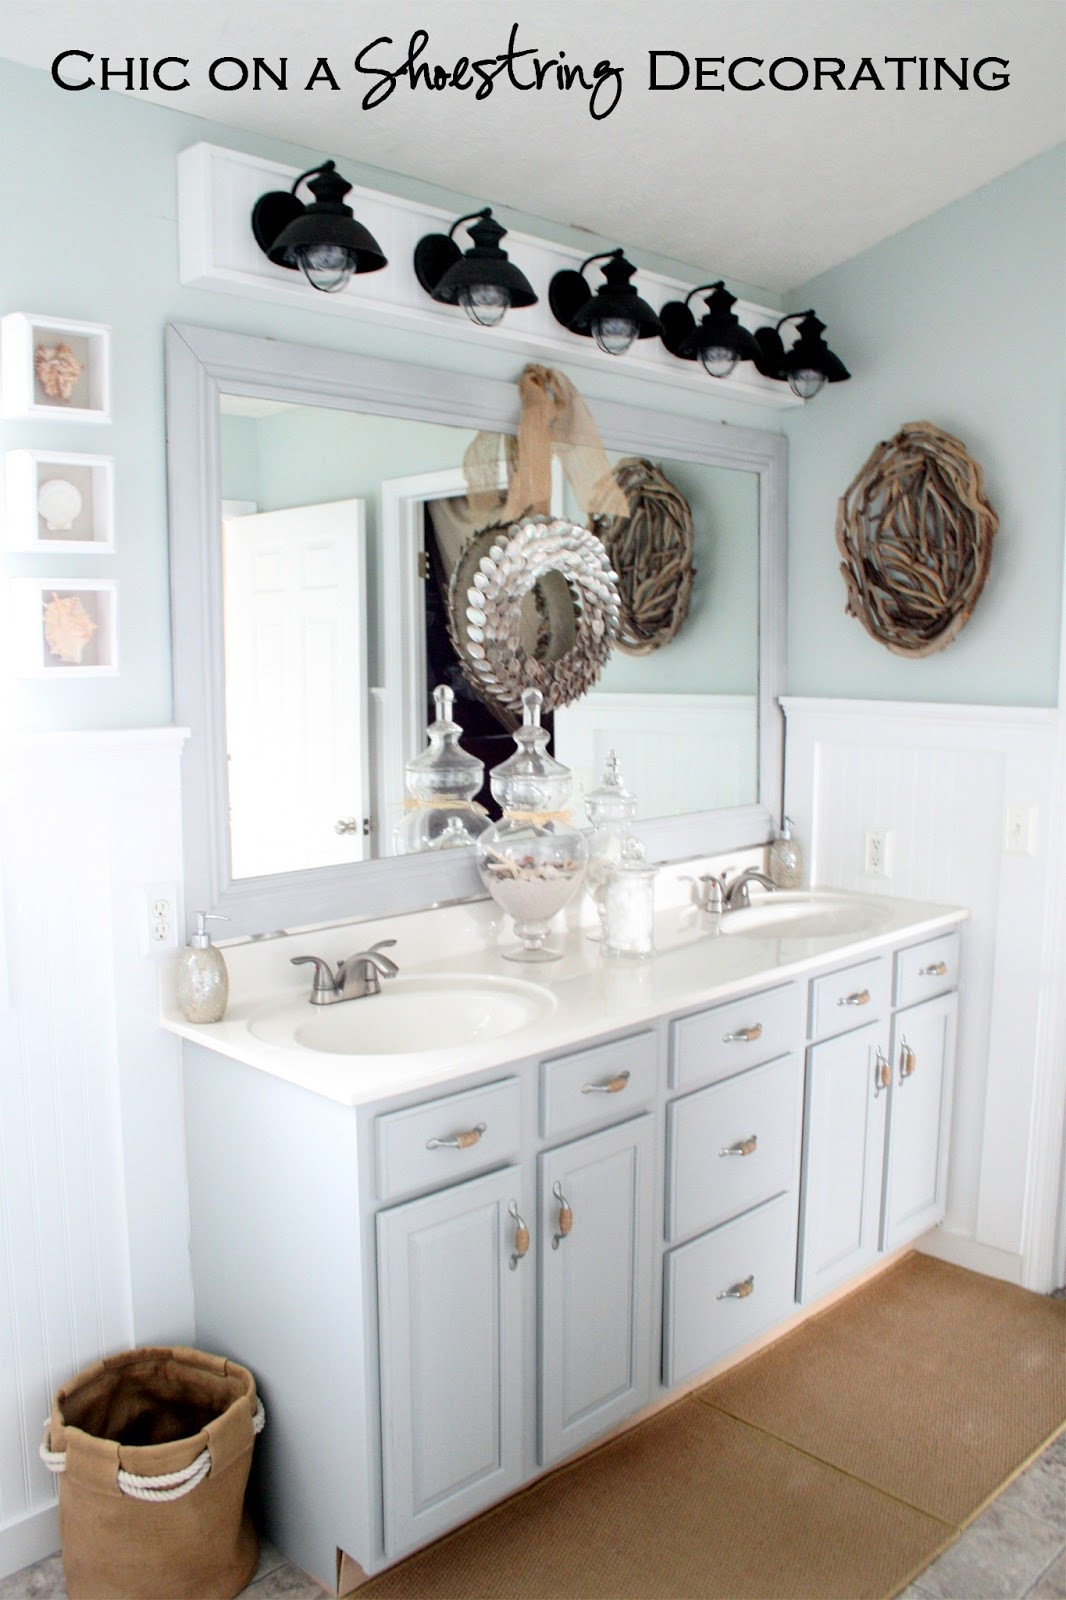 Diy Bathroom Light Fixtures
 Chic on a Shoestring Decorating How to Build a Bathroom